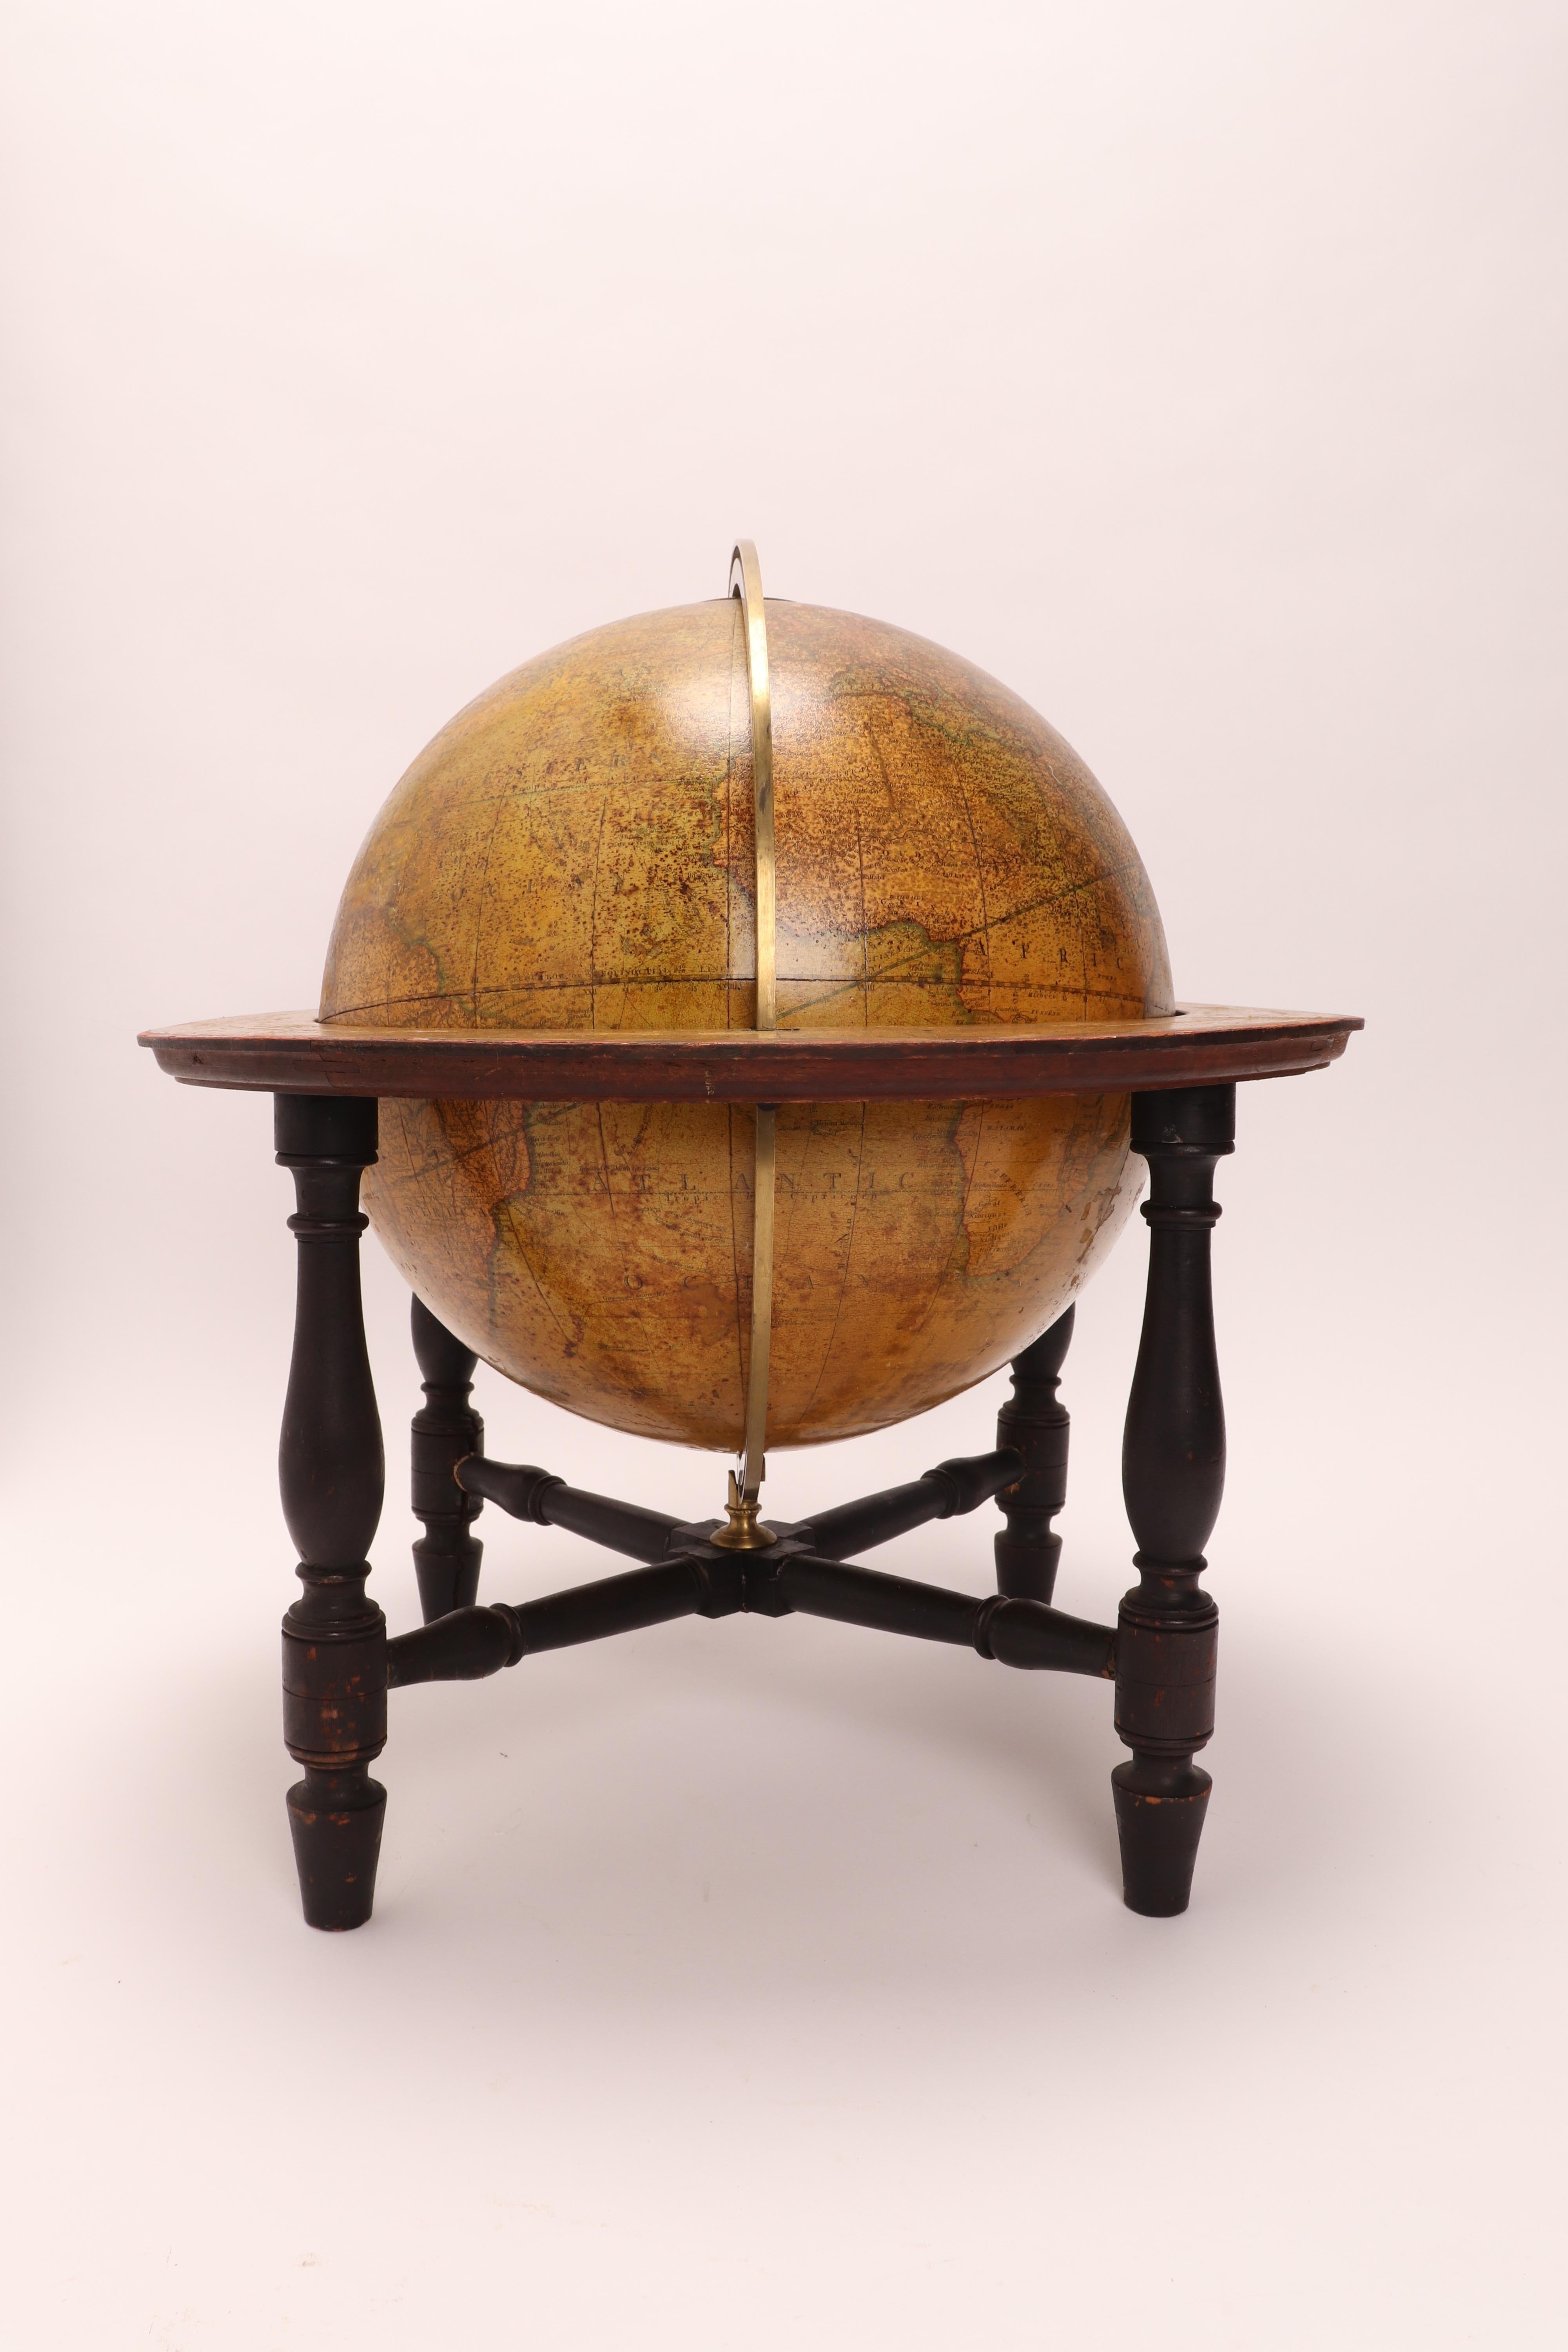 19th Century Rare 12 inches terrestrial globe signed Cary, London United Kingdom 1800. For Sale